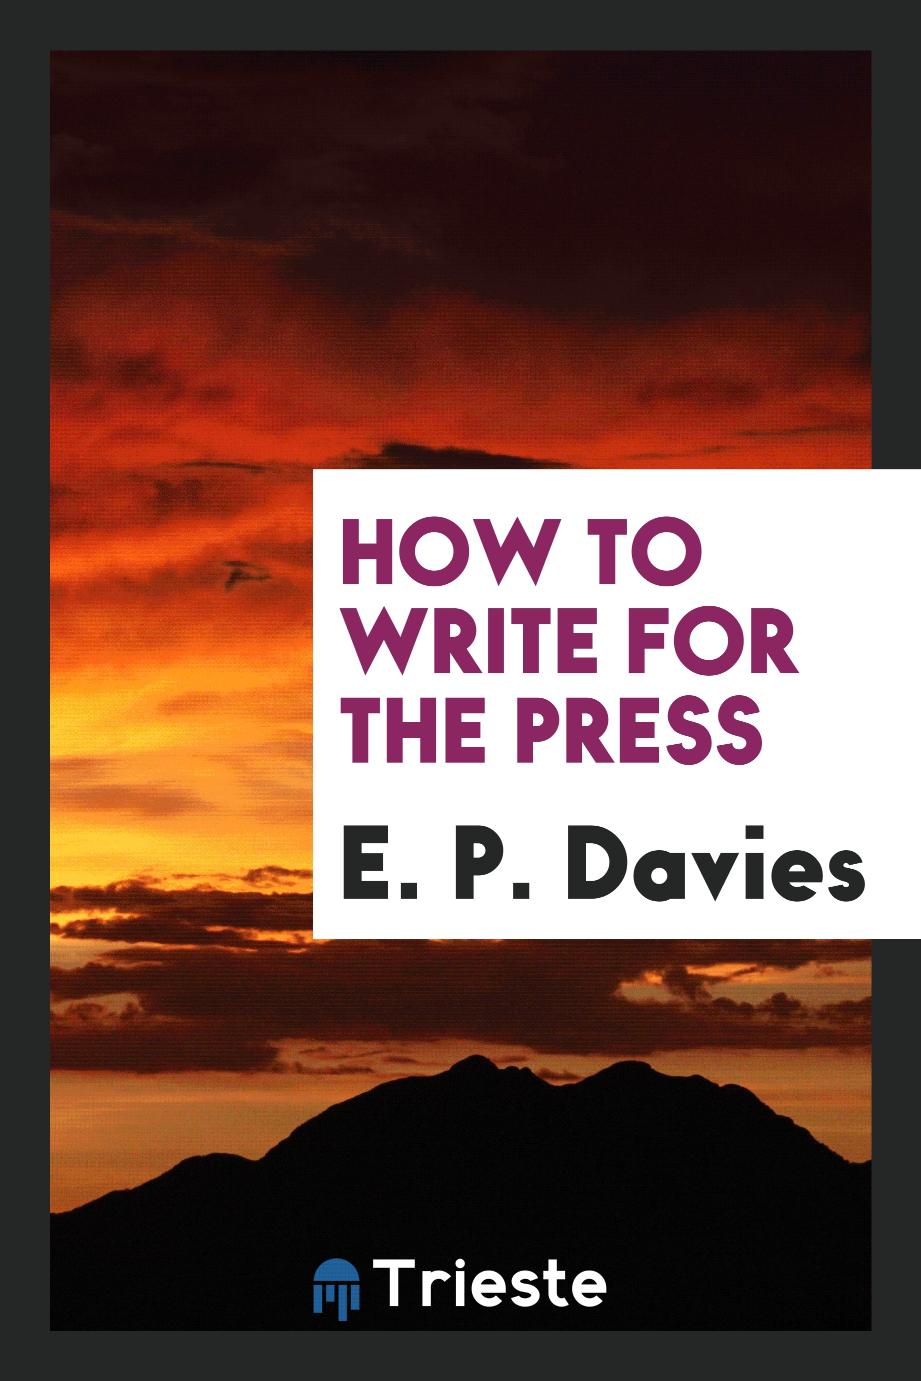 How to write for the press